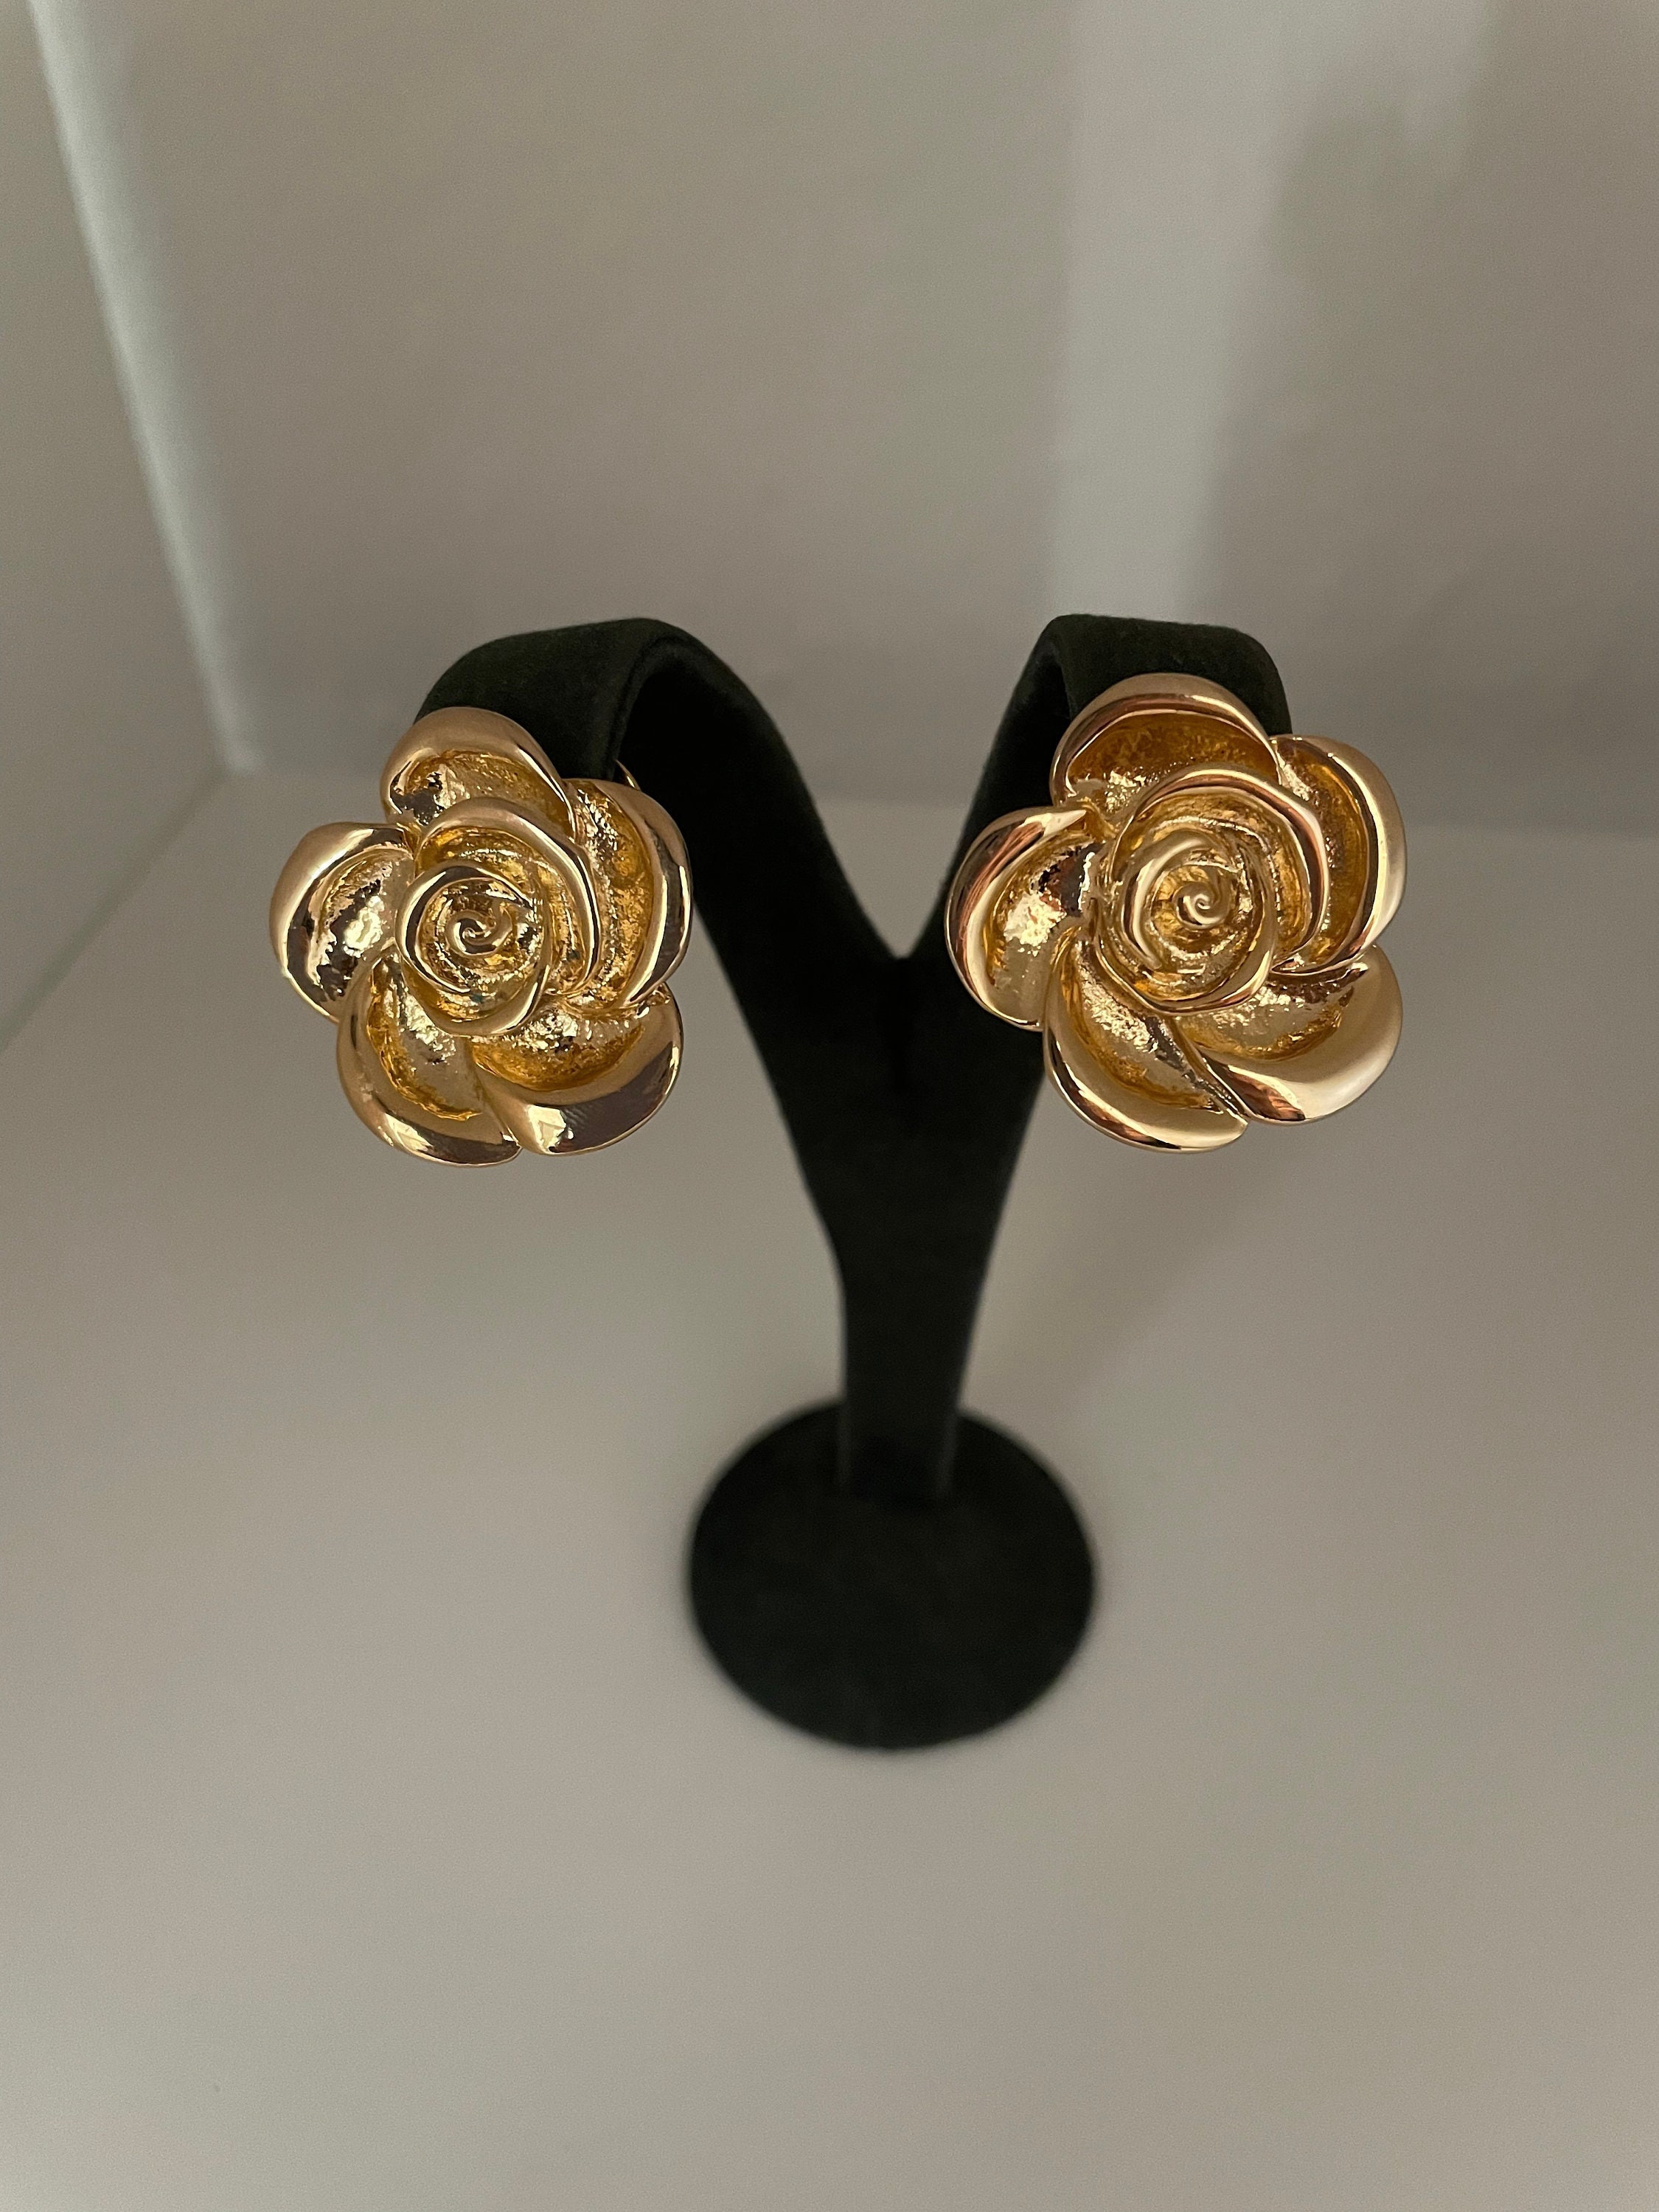 Vintage NOS Gold Plated Flower Clip Earrings 80s Clip-ons 